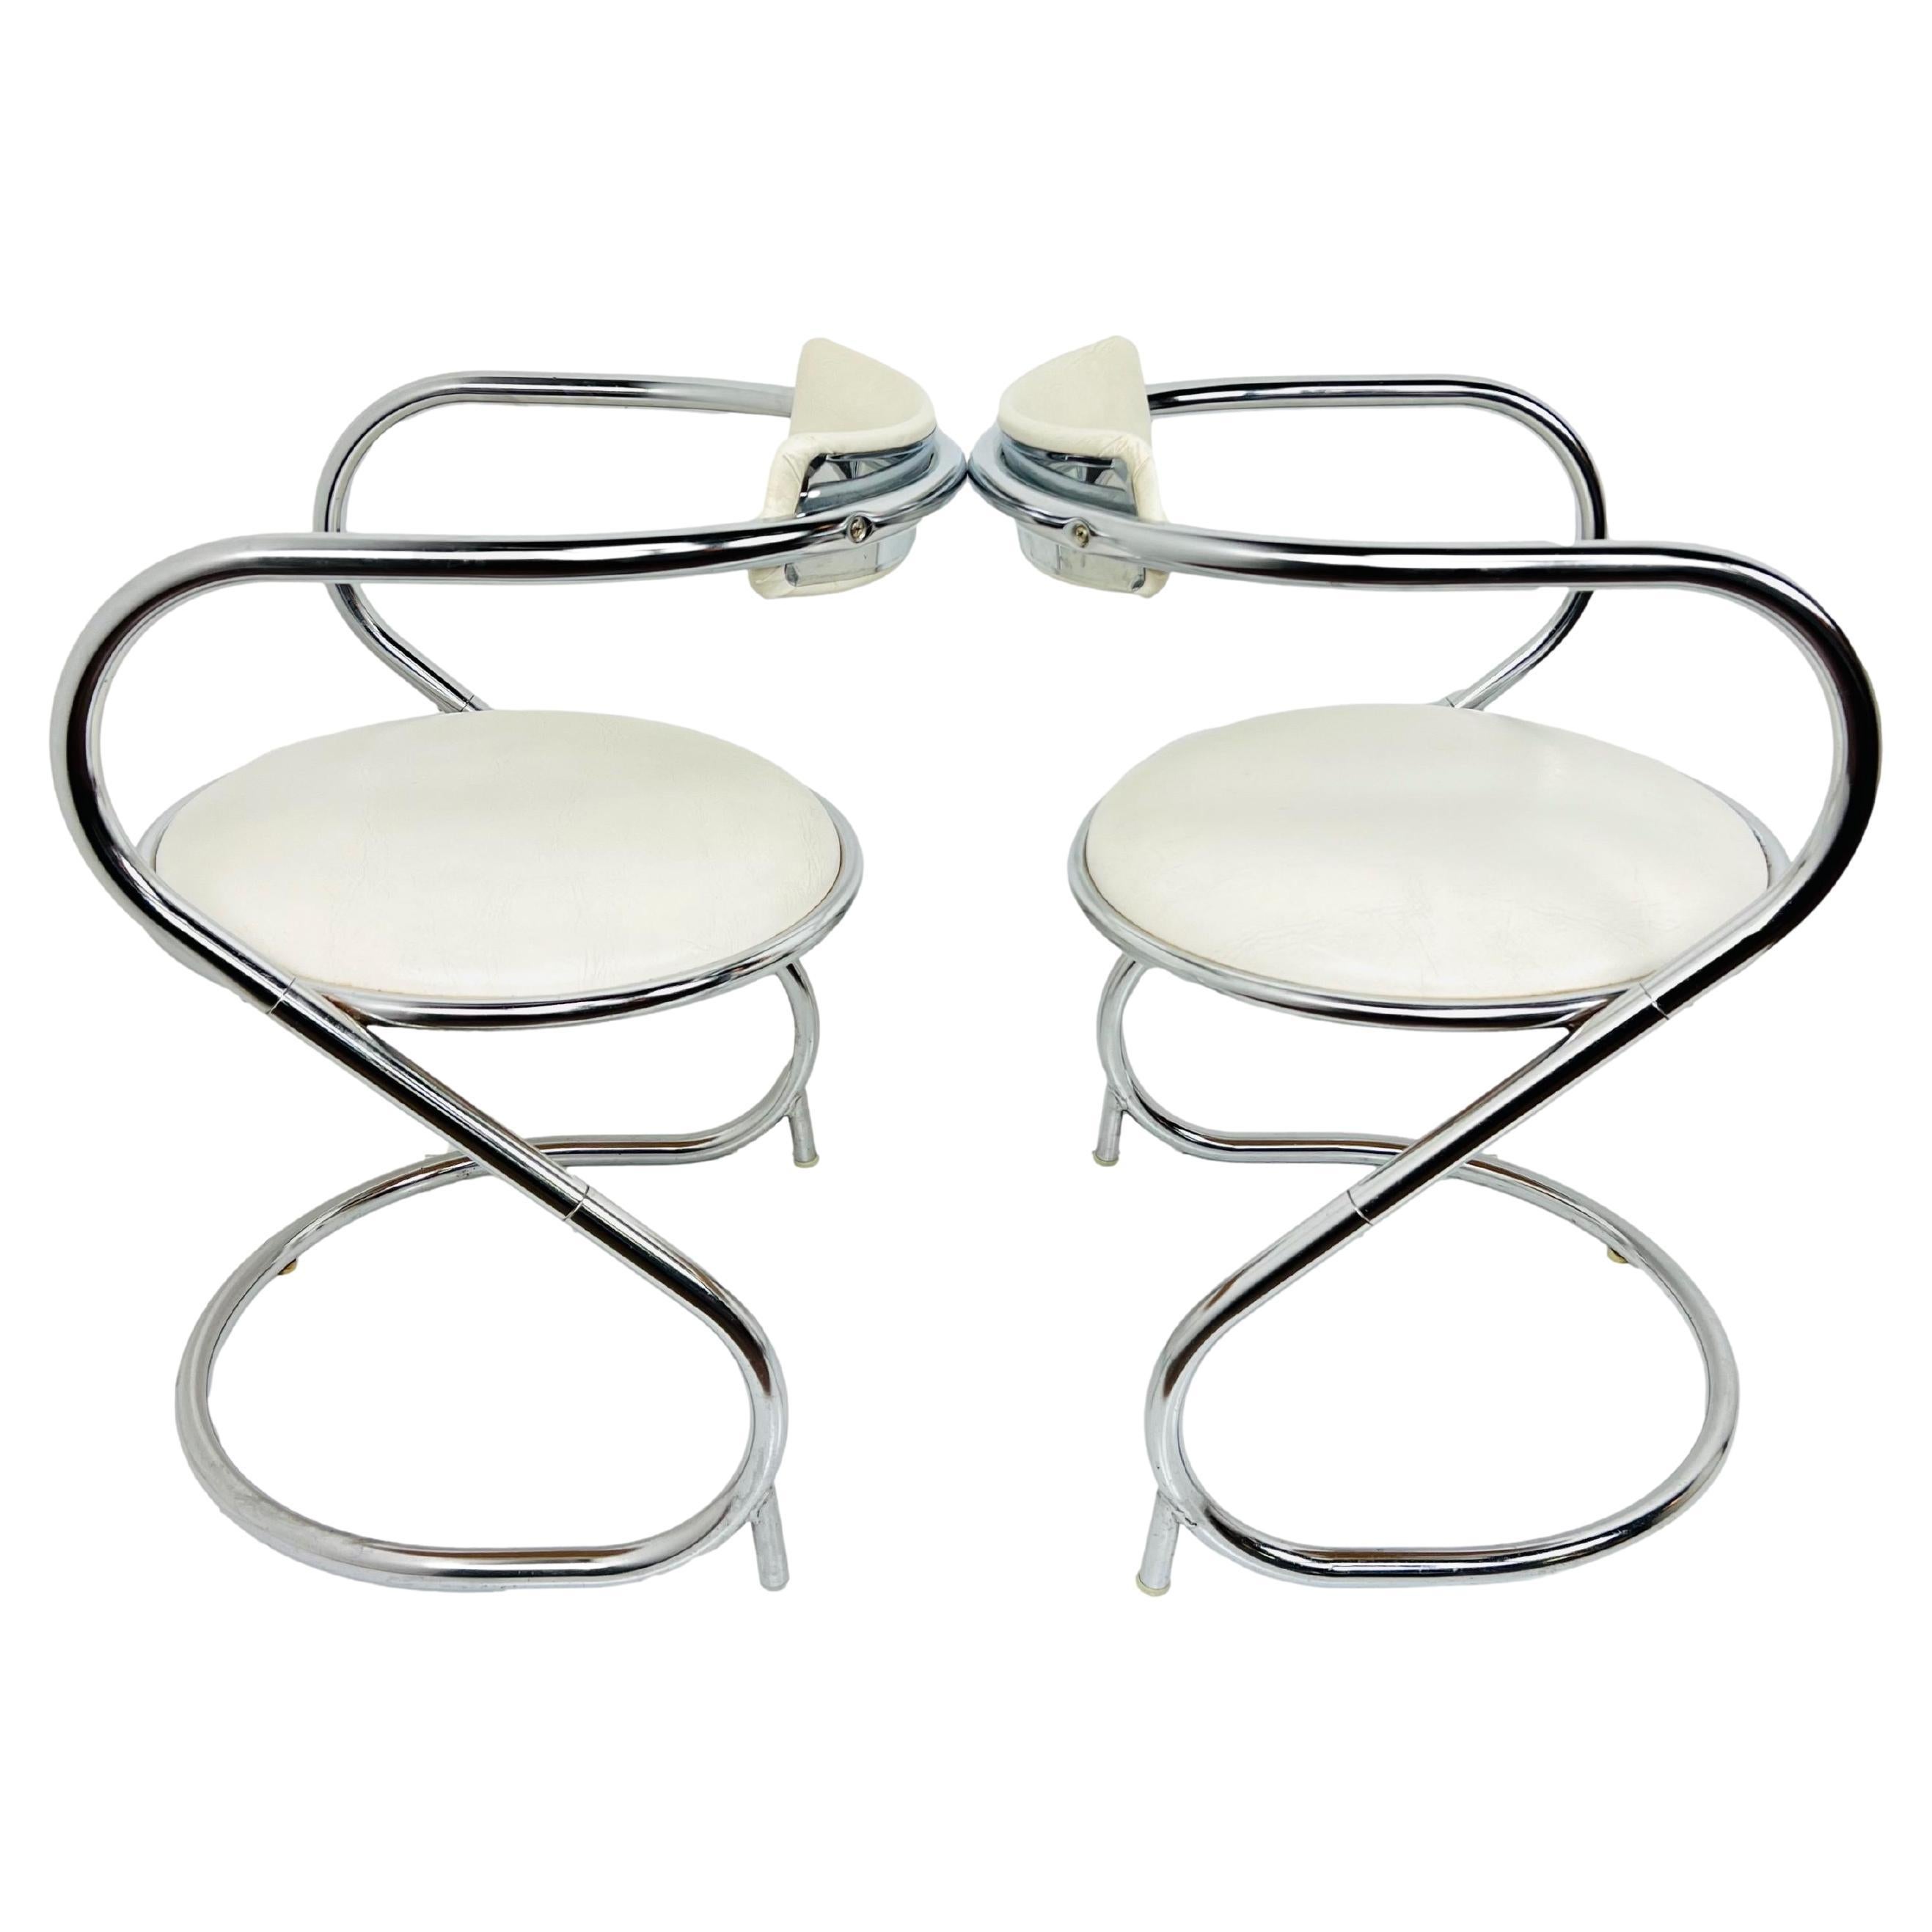 Pair of Midcentury Chrome Cantilever Chairs For Sale